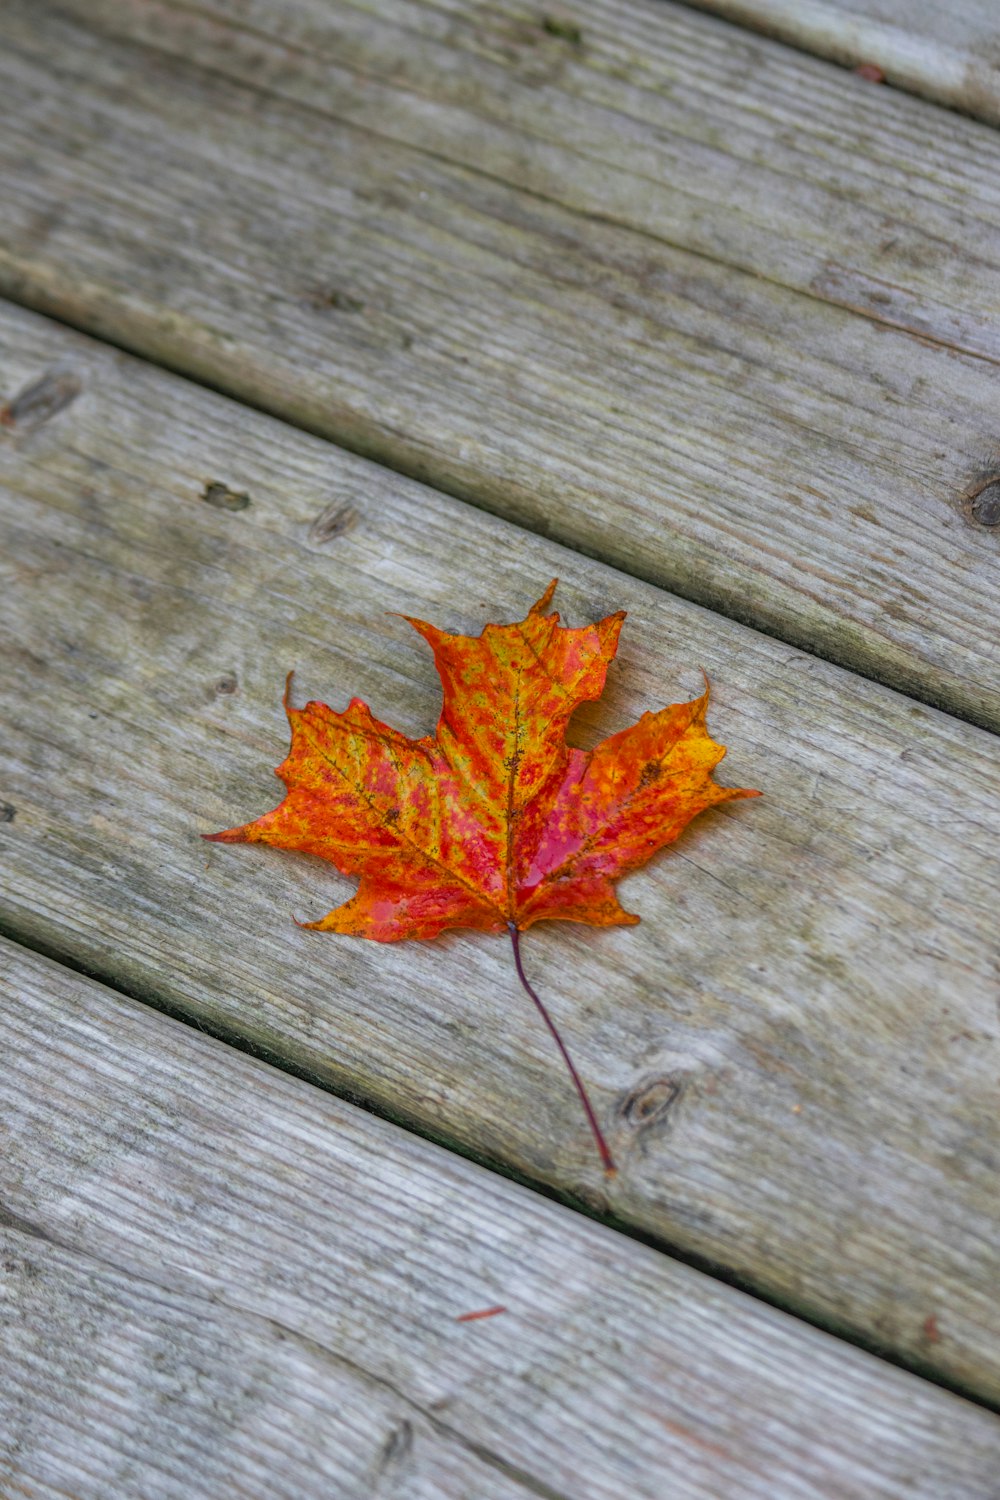 a single leaf laying on a wooden bench